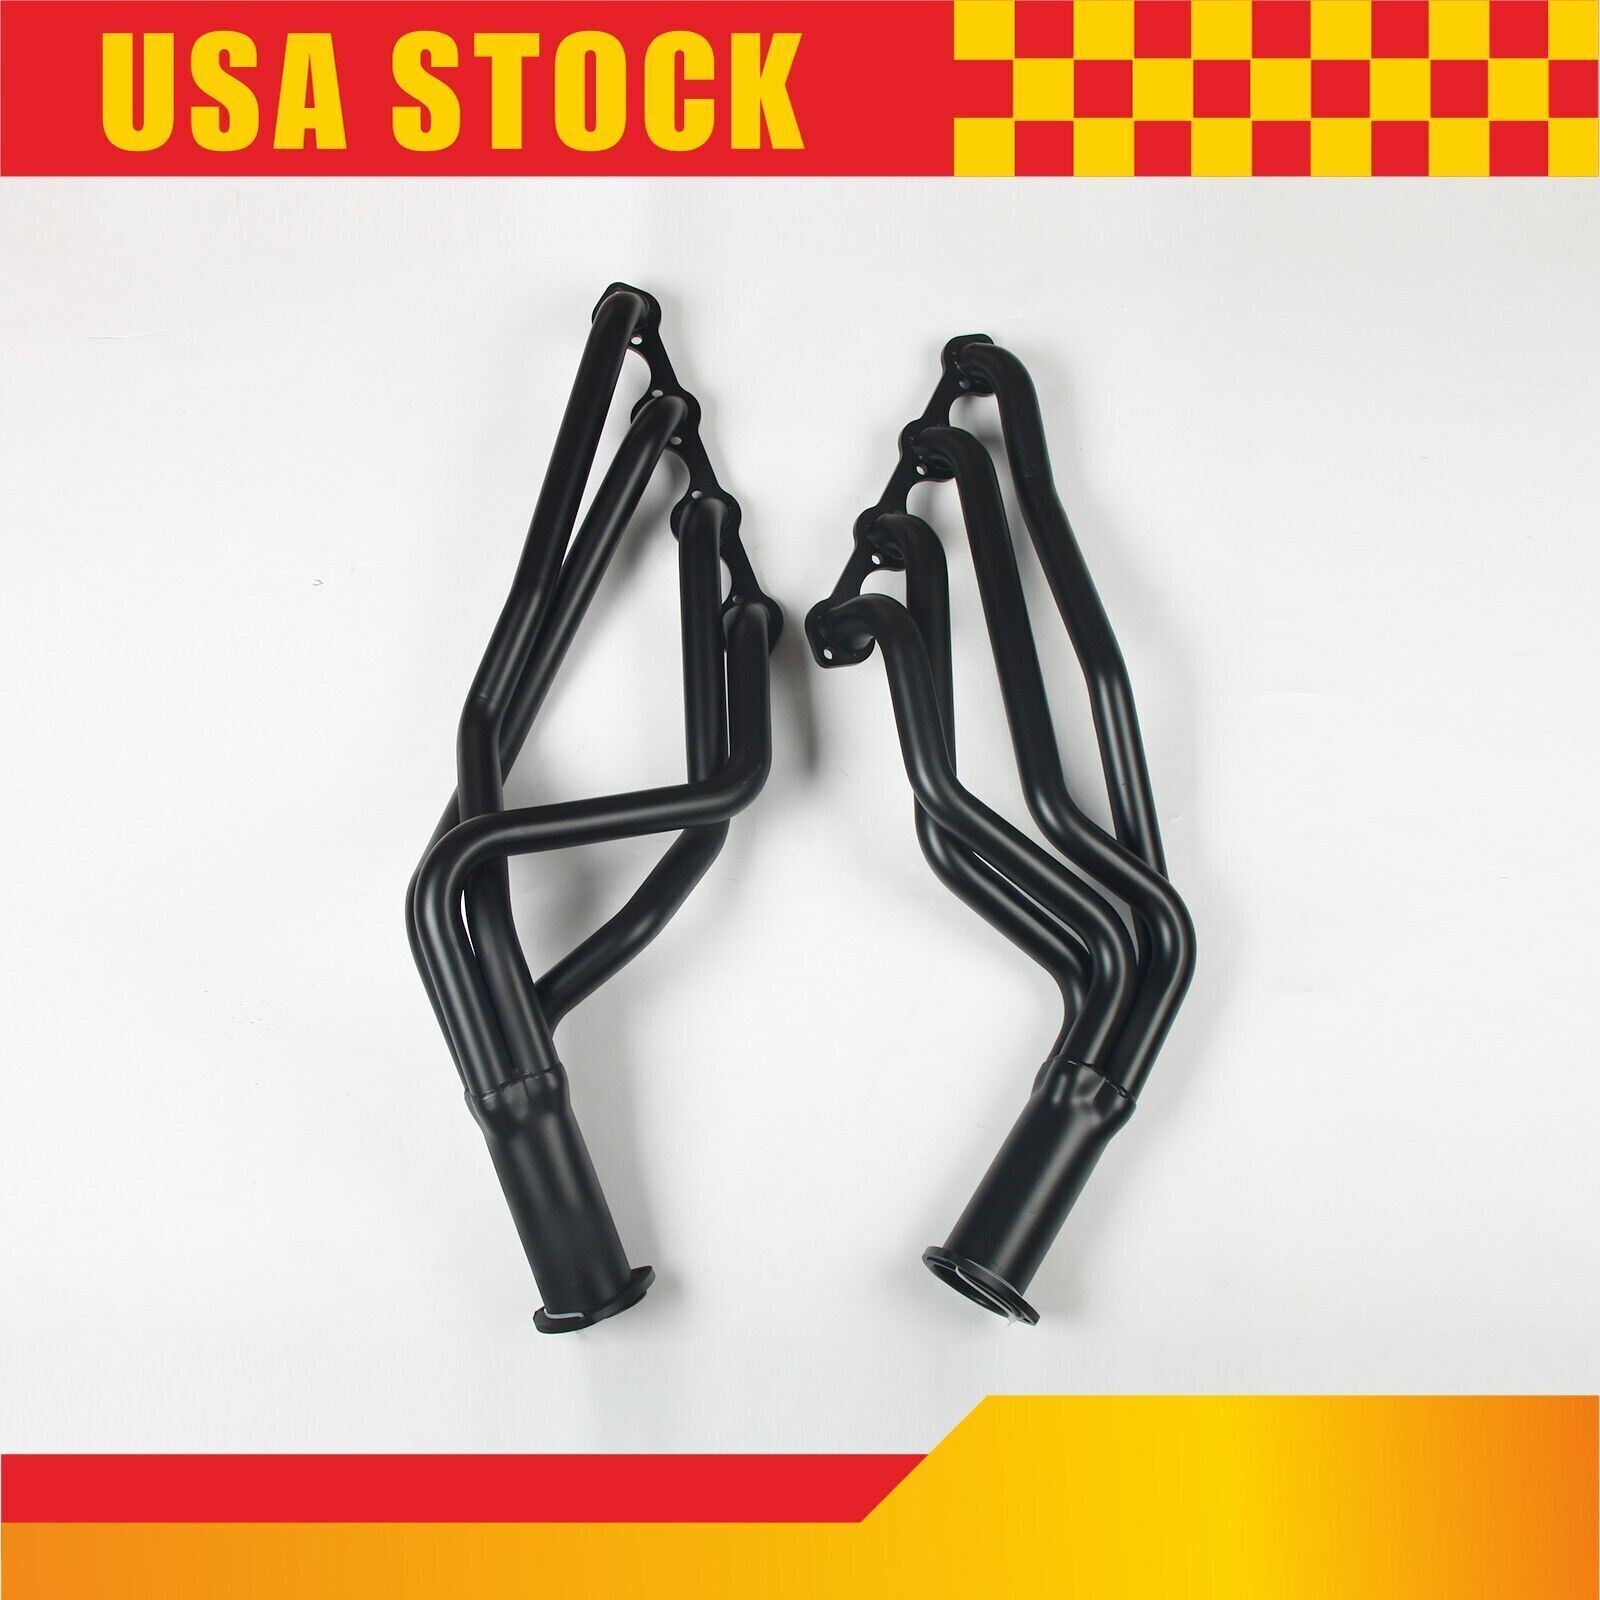 1-1/2'' Exhaust Long Headers for Mustang/Cougar: 351W Black Paint